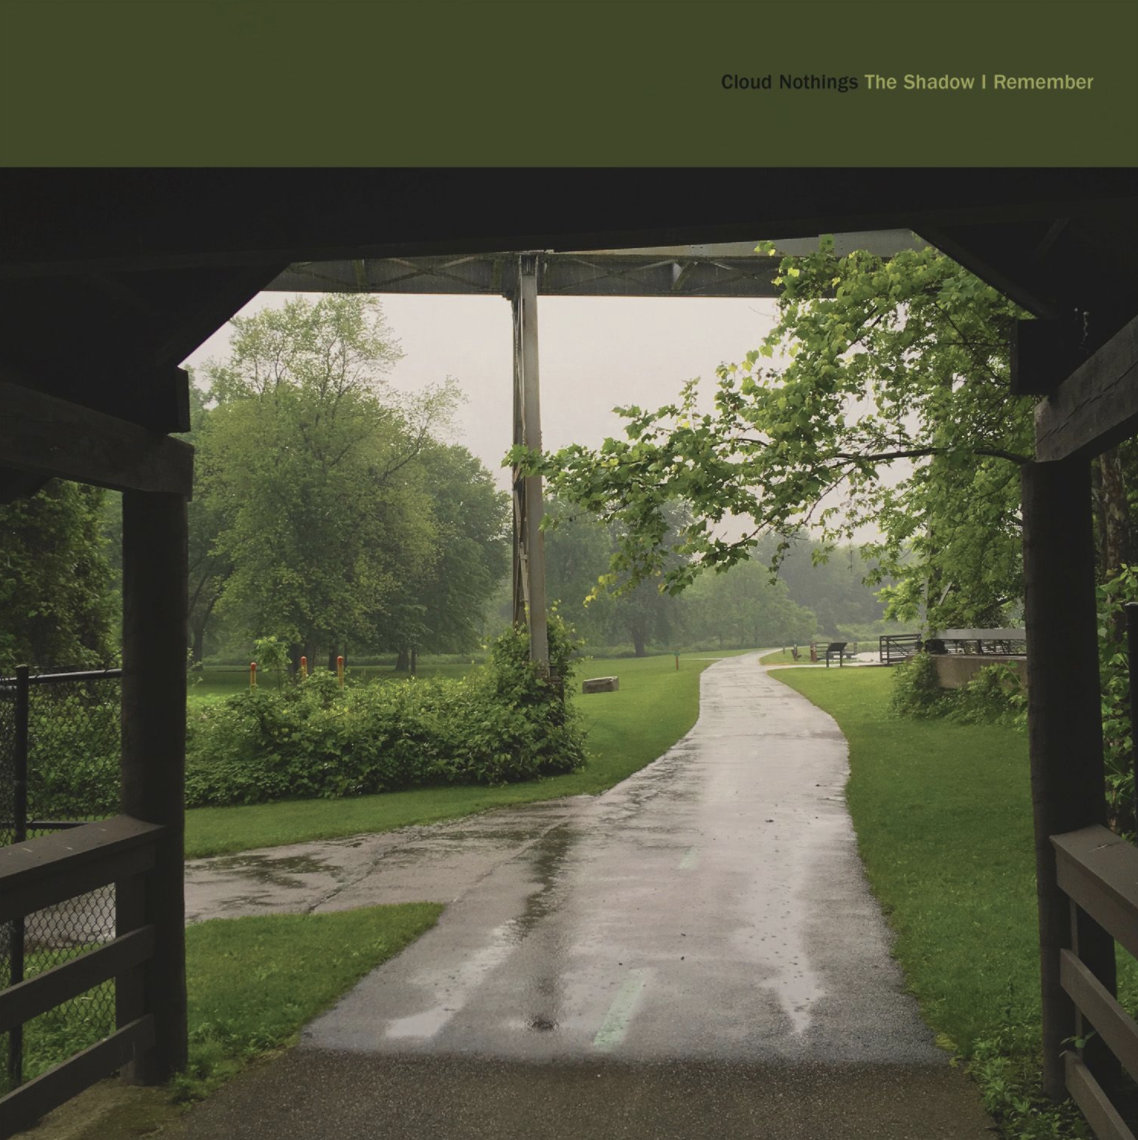 Cloud Nothings Announce New Album <i>
<p><em><strong>The Shadow I Remember </strong></em><strong>tracklist</strong></p>
<p>1. Oslo</p>
<p>2. Nothing Without You</p>
<p>3. The Spirit Of</p>
<p>4. Only Light</p>
<p>5. Nara</p>
<p>6. Open Rain</p>
<p>7. Sound Of Alarm</p>
<p>8. Am I Something</p>
<p>9. It’s Love</p>
<p>10. A Longer Moon</p>
<p>11. The Room It Was</p>
</p>		</div>
				</div>
						</div>
					</div>
		</div>
								</div>
					</div>
		</section>
				<section data-particle_enable=